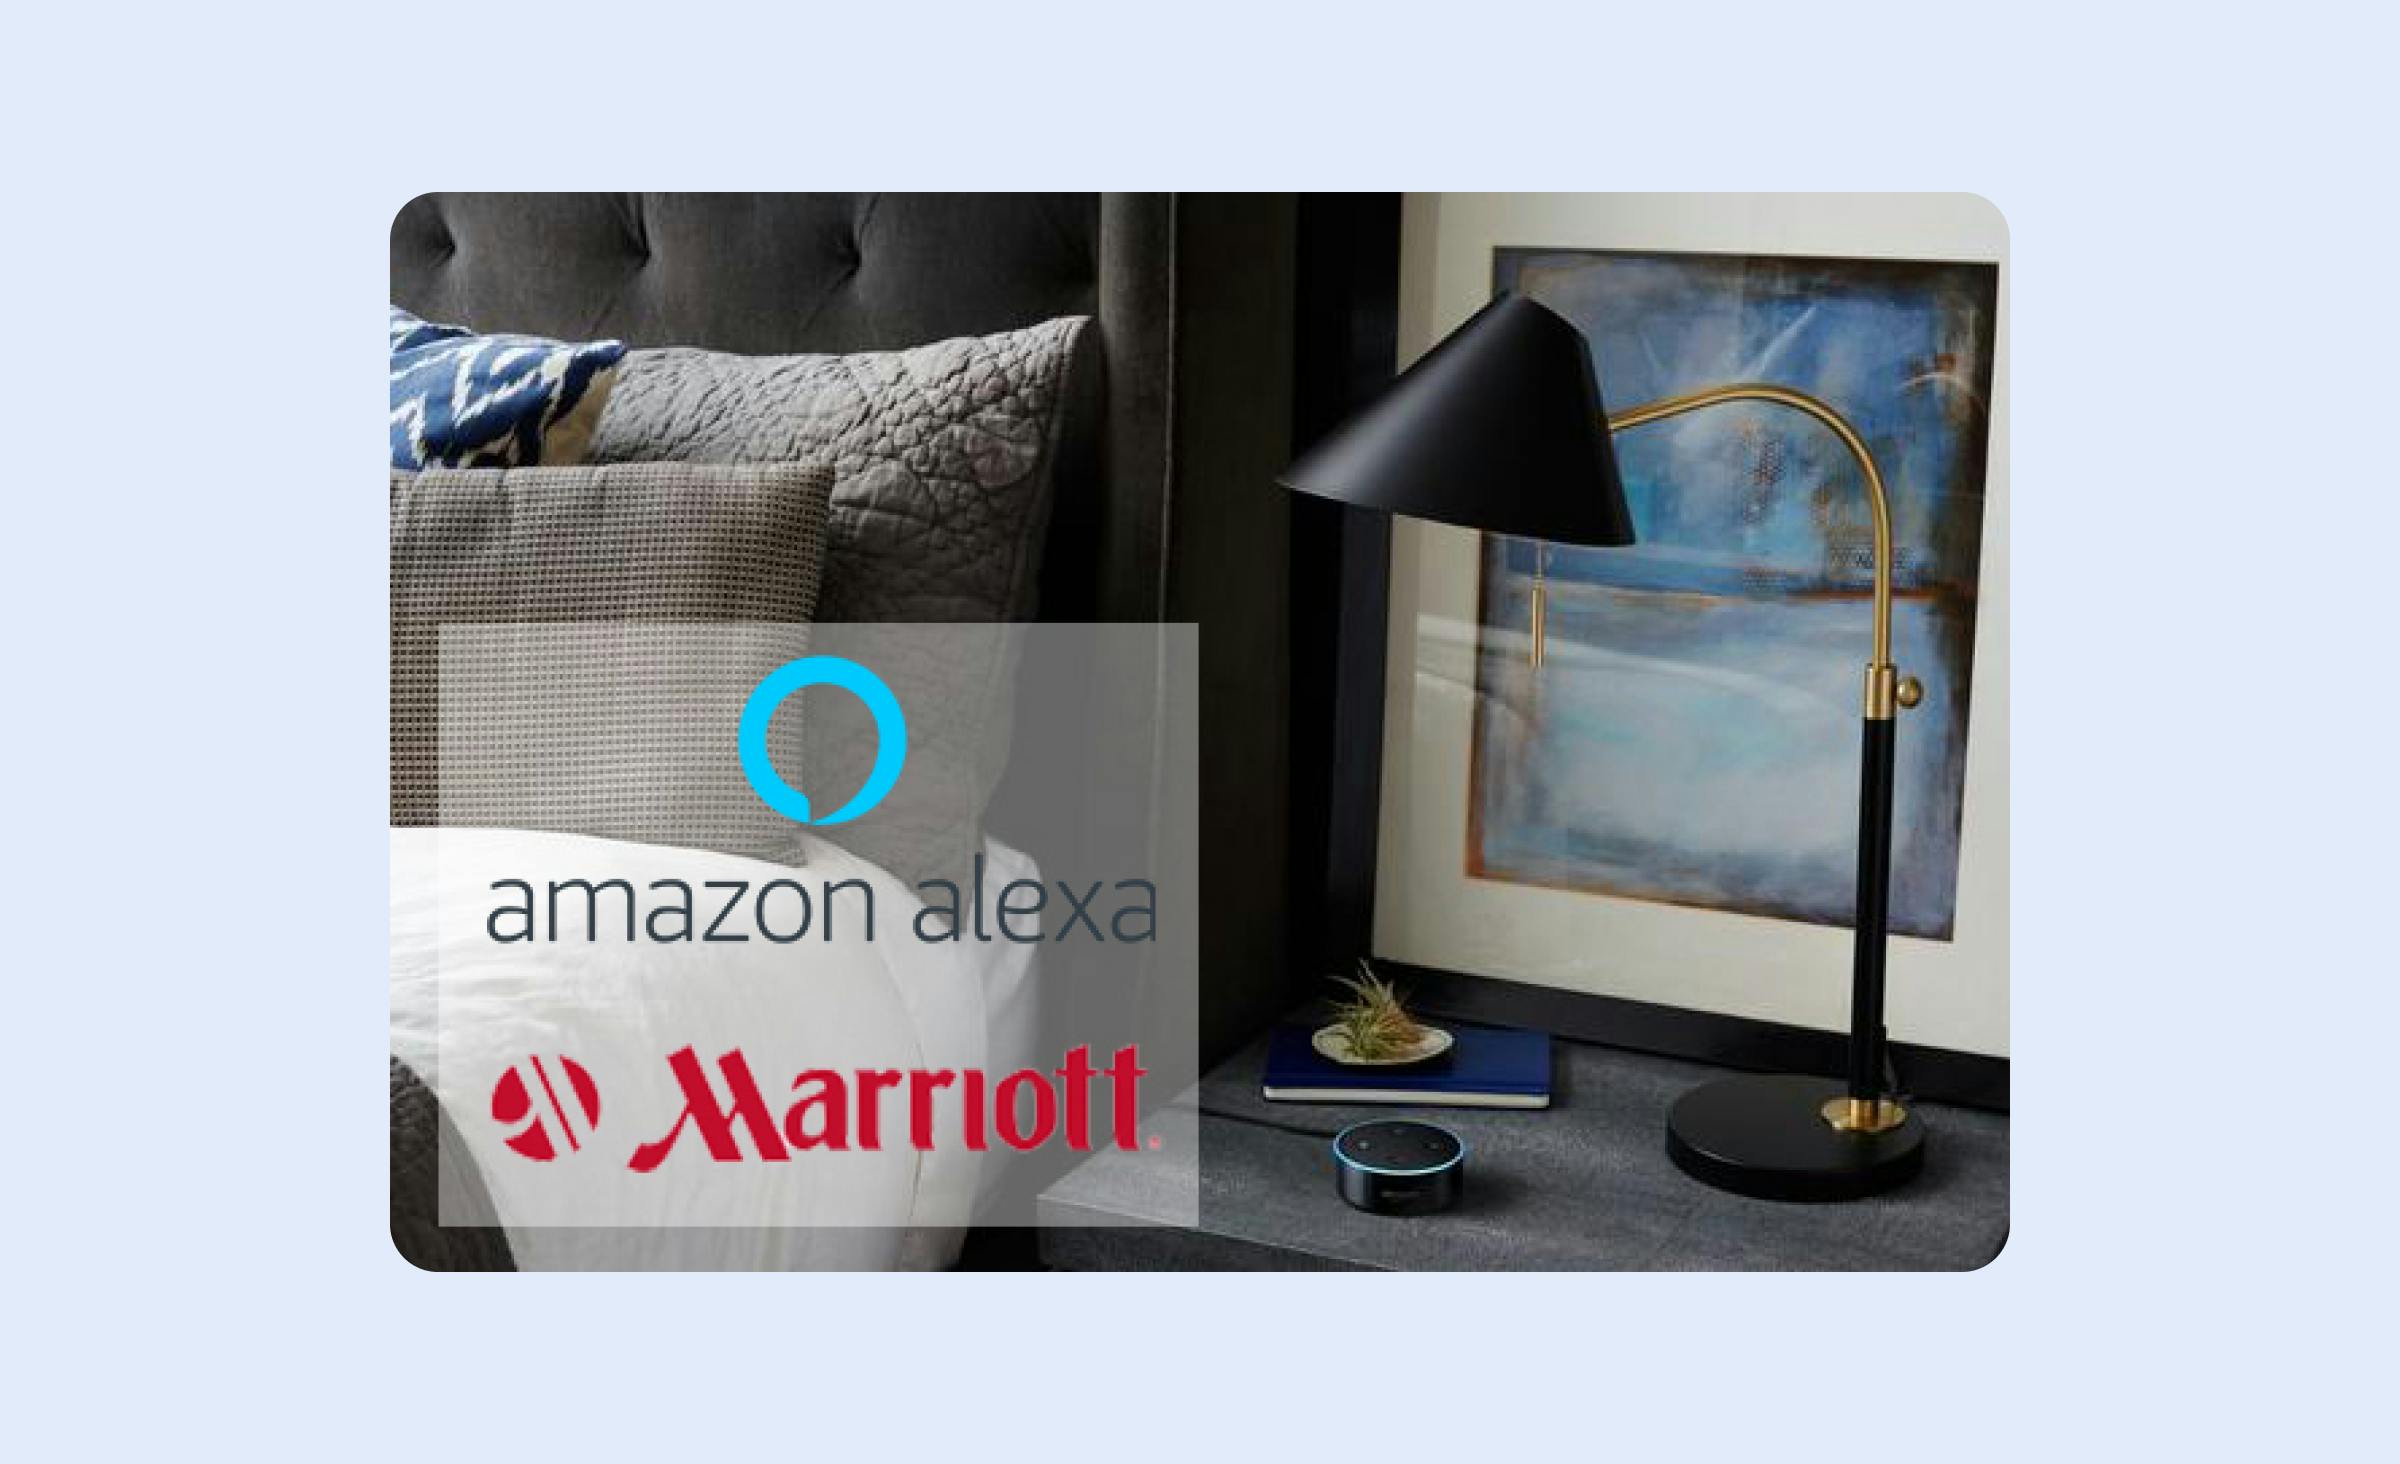 Data management services: Marriott Hotels use Alexa voice assistant to enhance their service